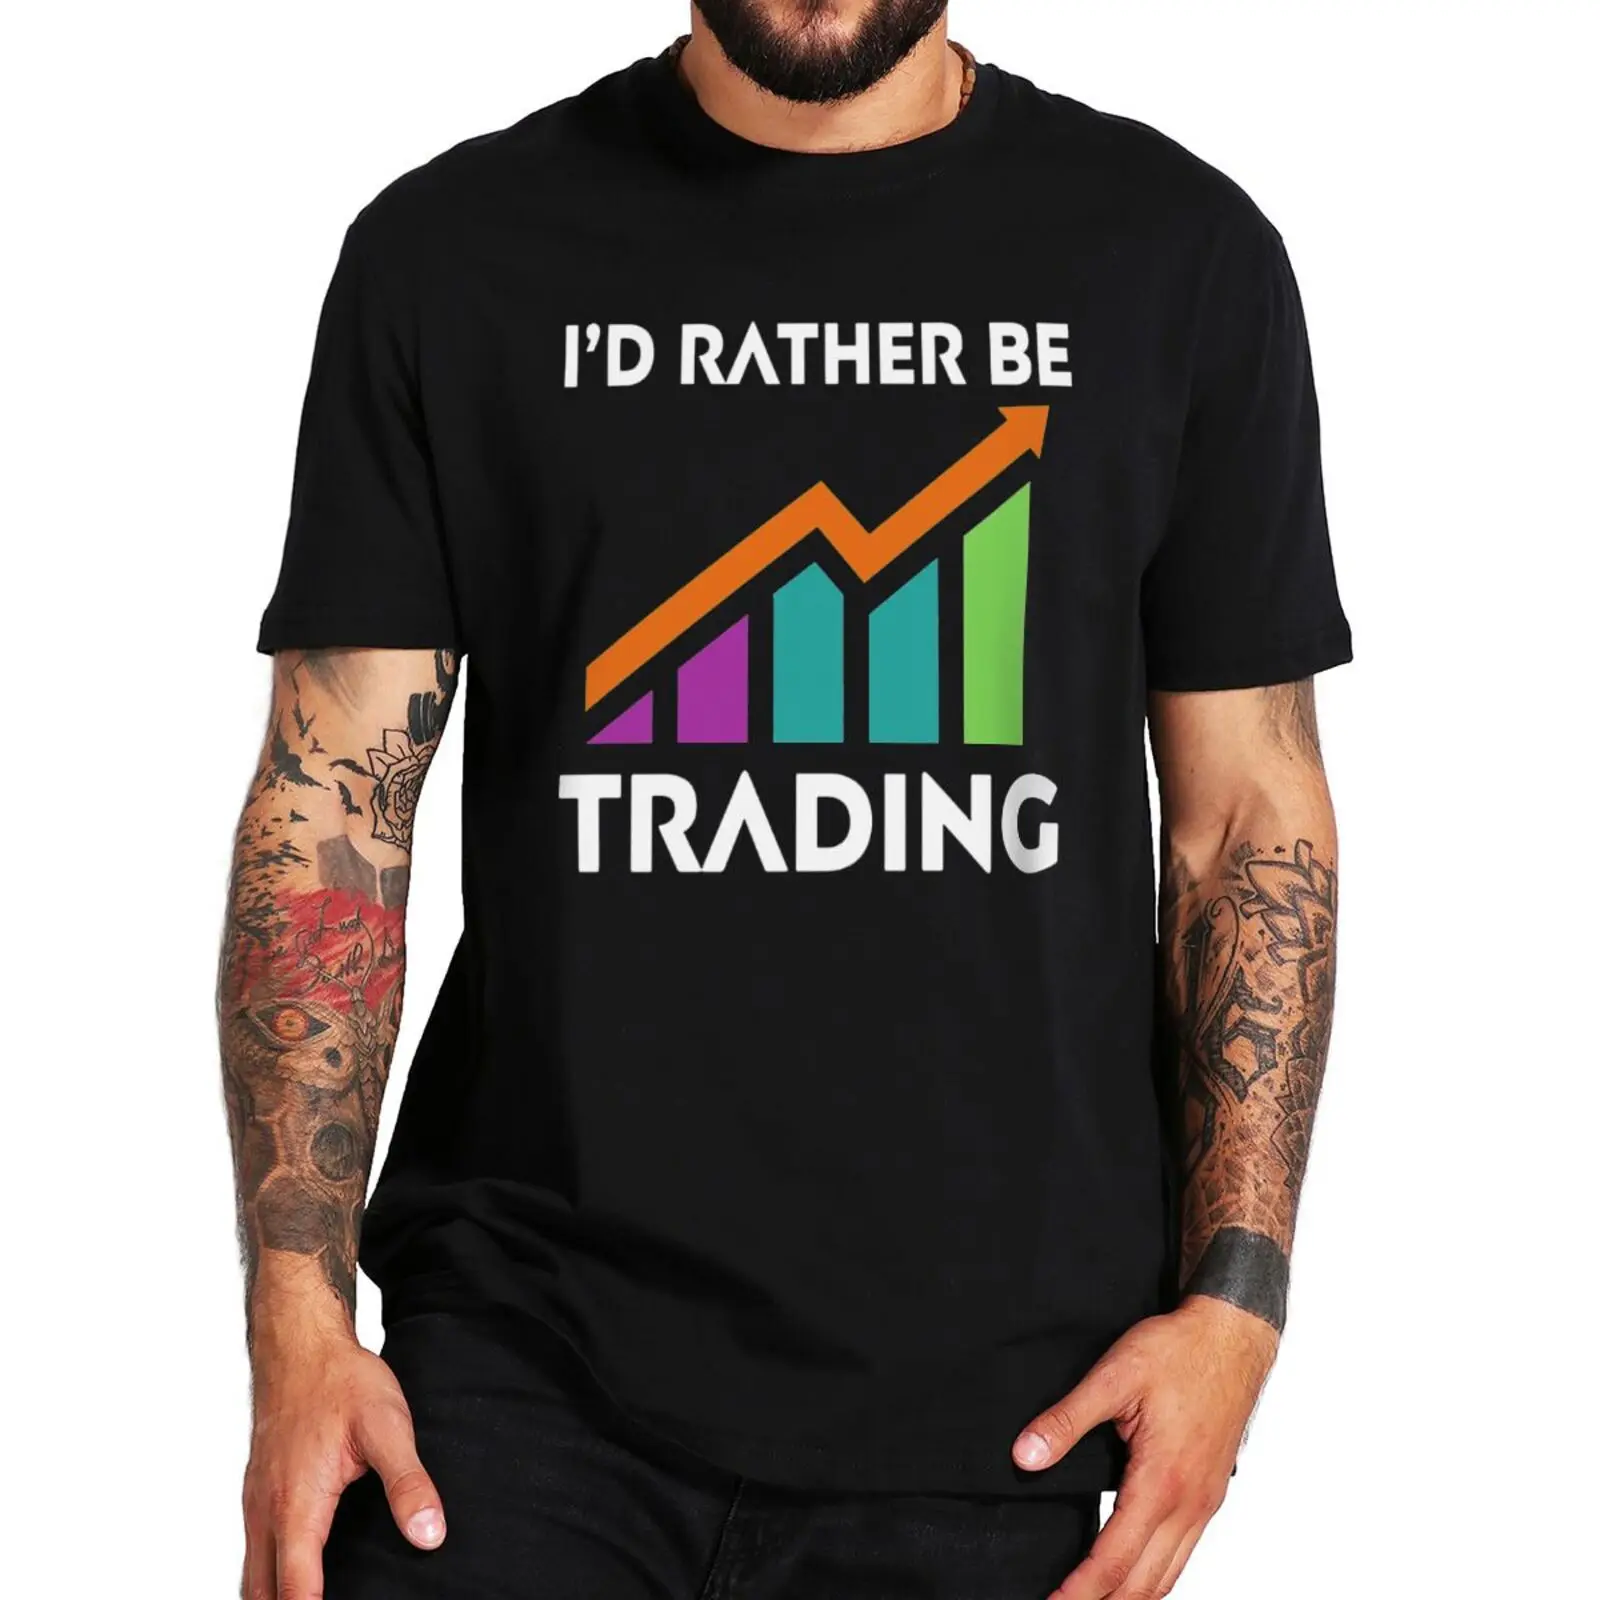 

I'd Rather Be Trading T-shirt Stock Market Trading Lovers Cryptocurrency Gifts Tee Tops Soft Cotton Summer T Shirt